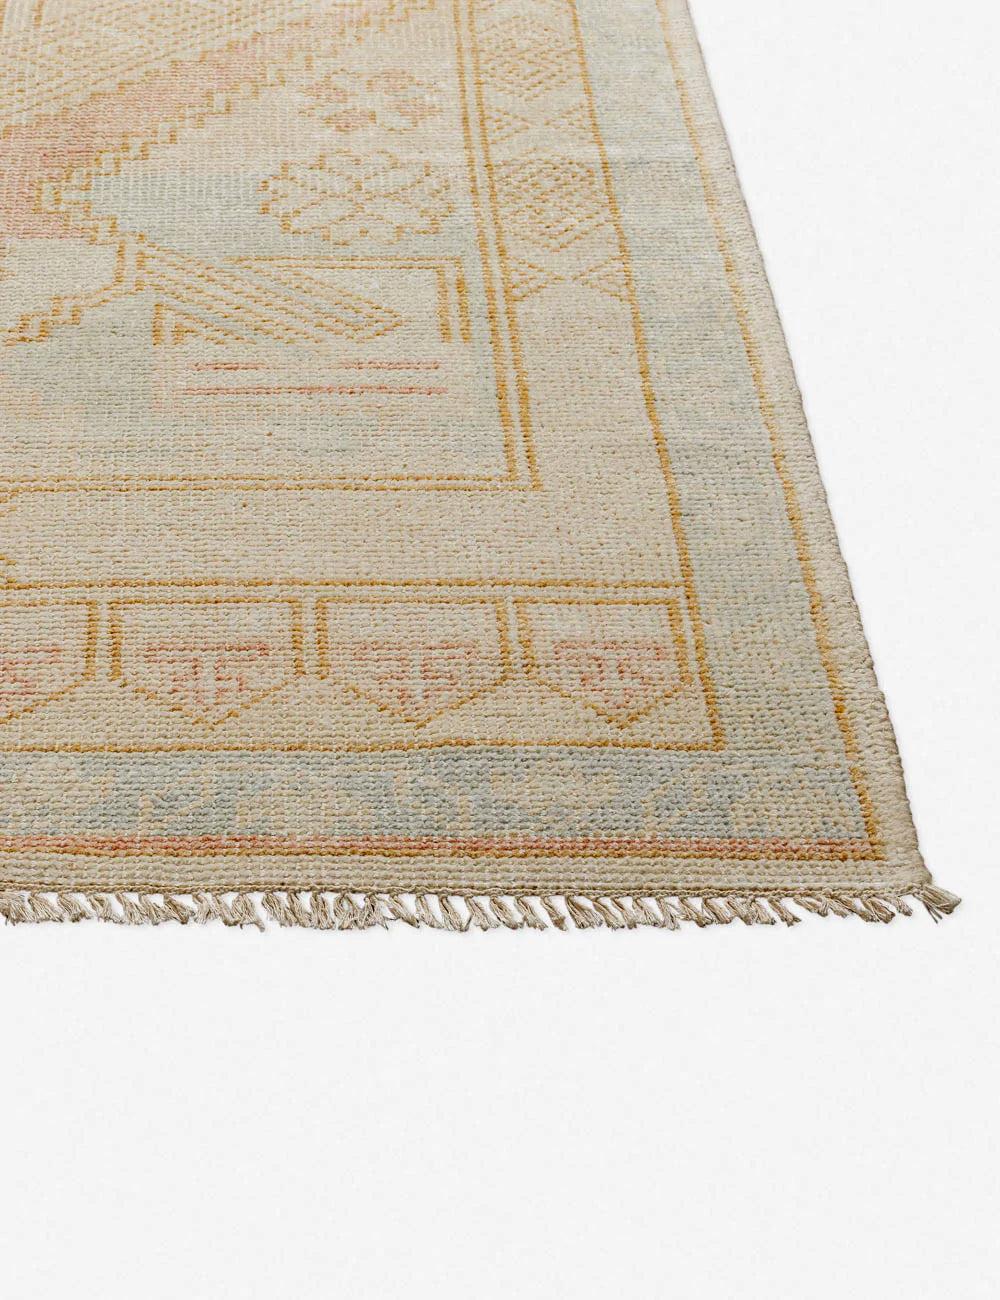 Serene Blue Medallion 9' x 12' Hand-Knotted Wool-Blend Area Rug